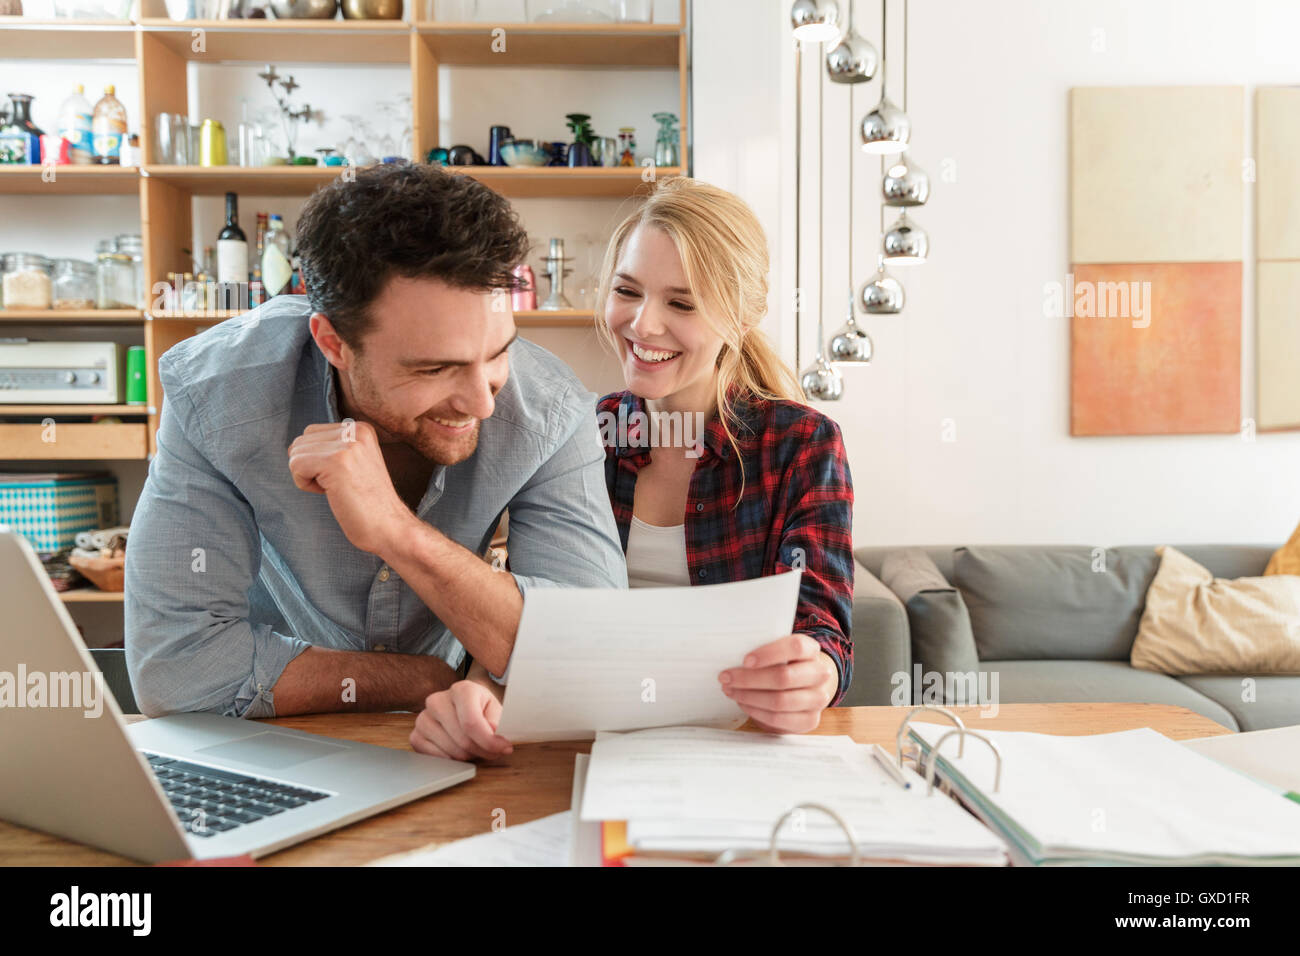 Couple with laptop looking at paperwork smiling Stock Photo